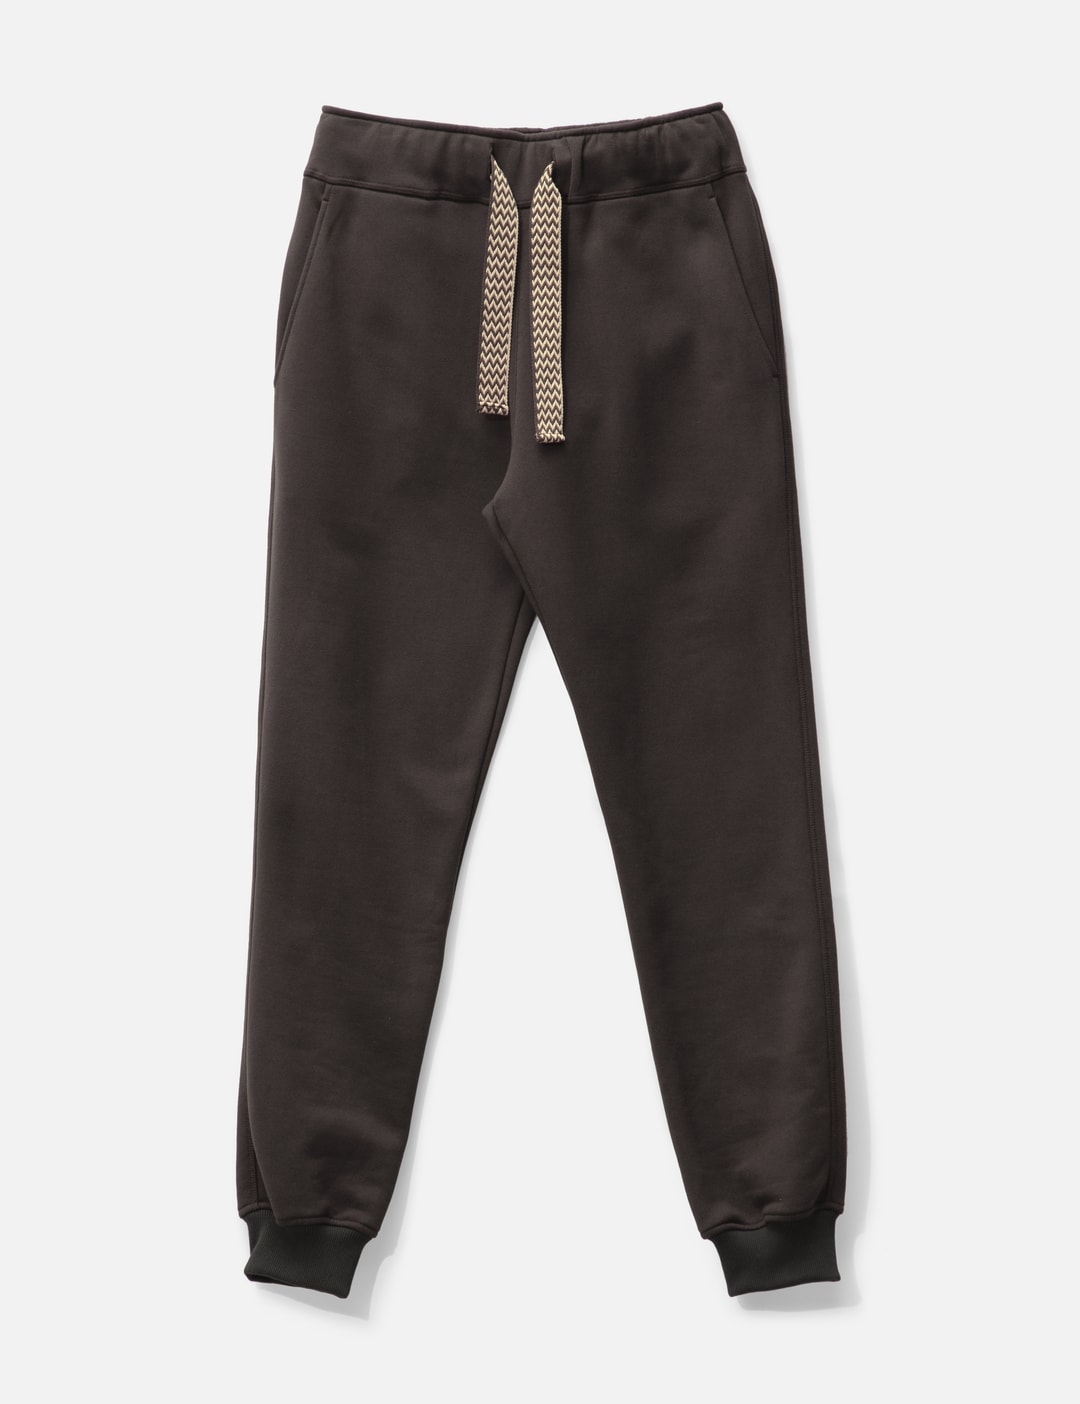 Lanvin - Curb Lace Joggers | HBX - Globally Curated Fashion and ...